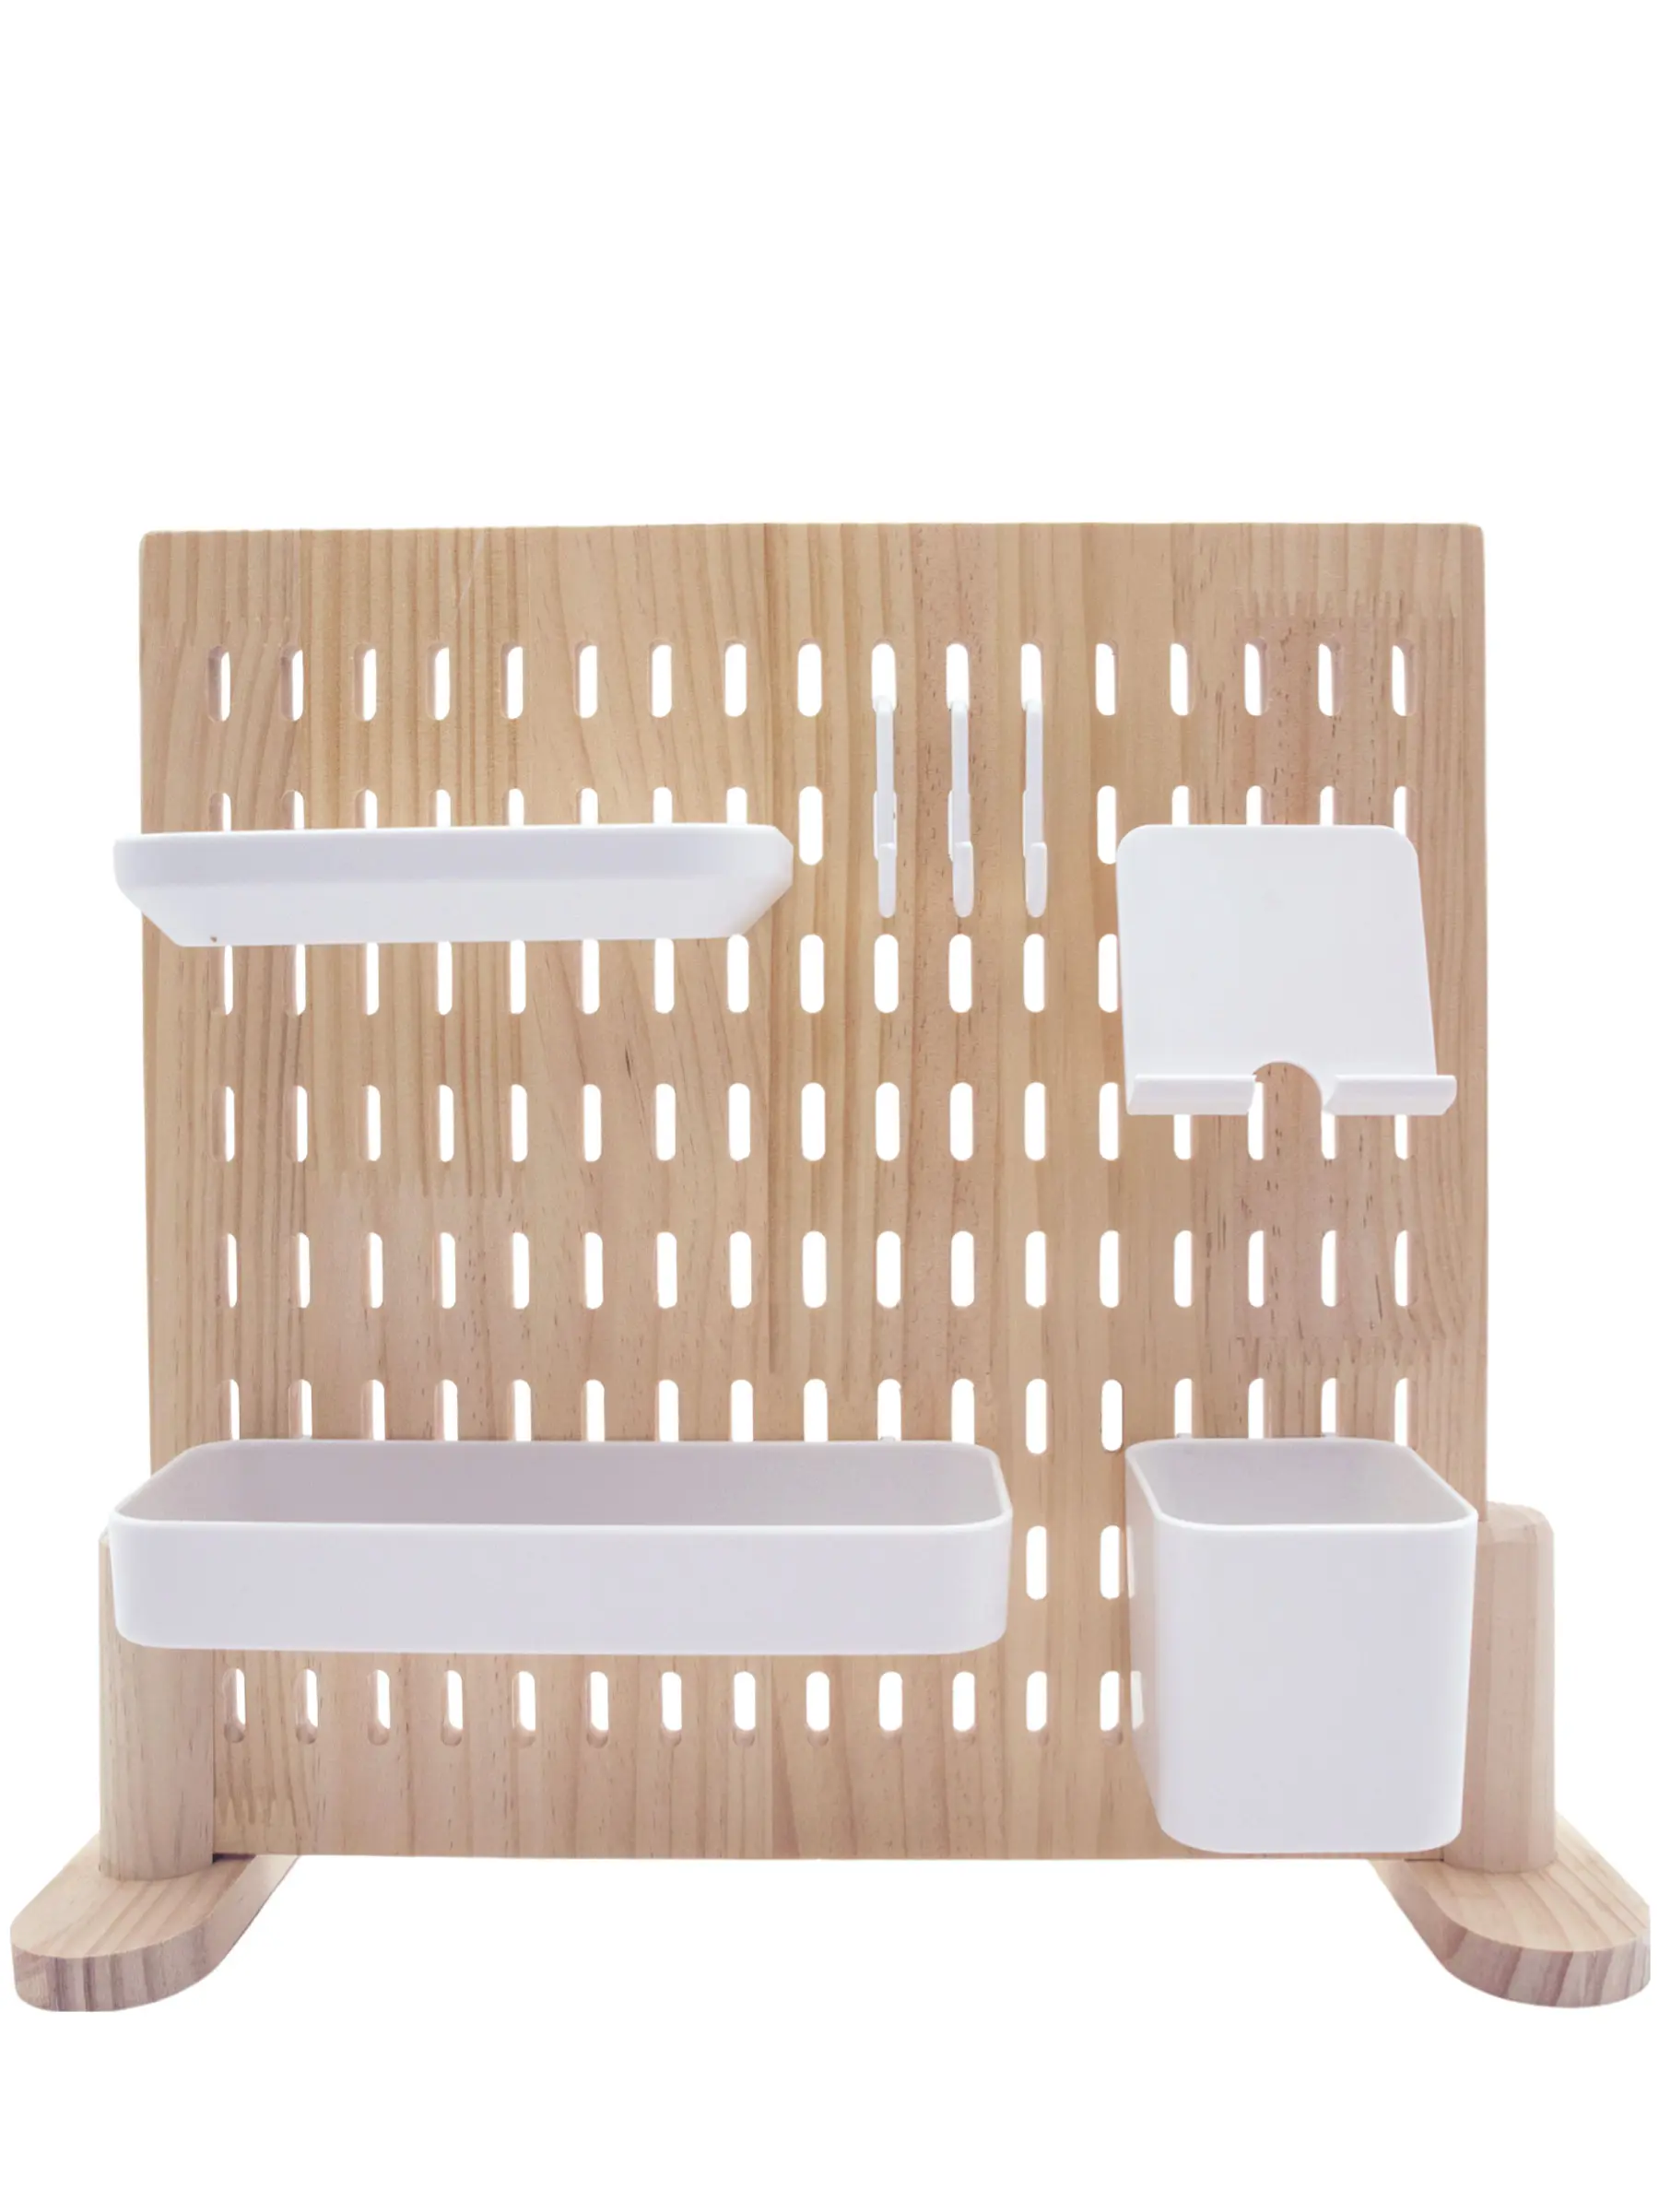 The Wooden Desk Pegboard with Pegboard accessories